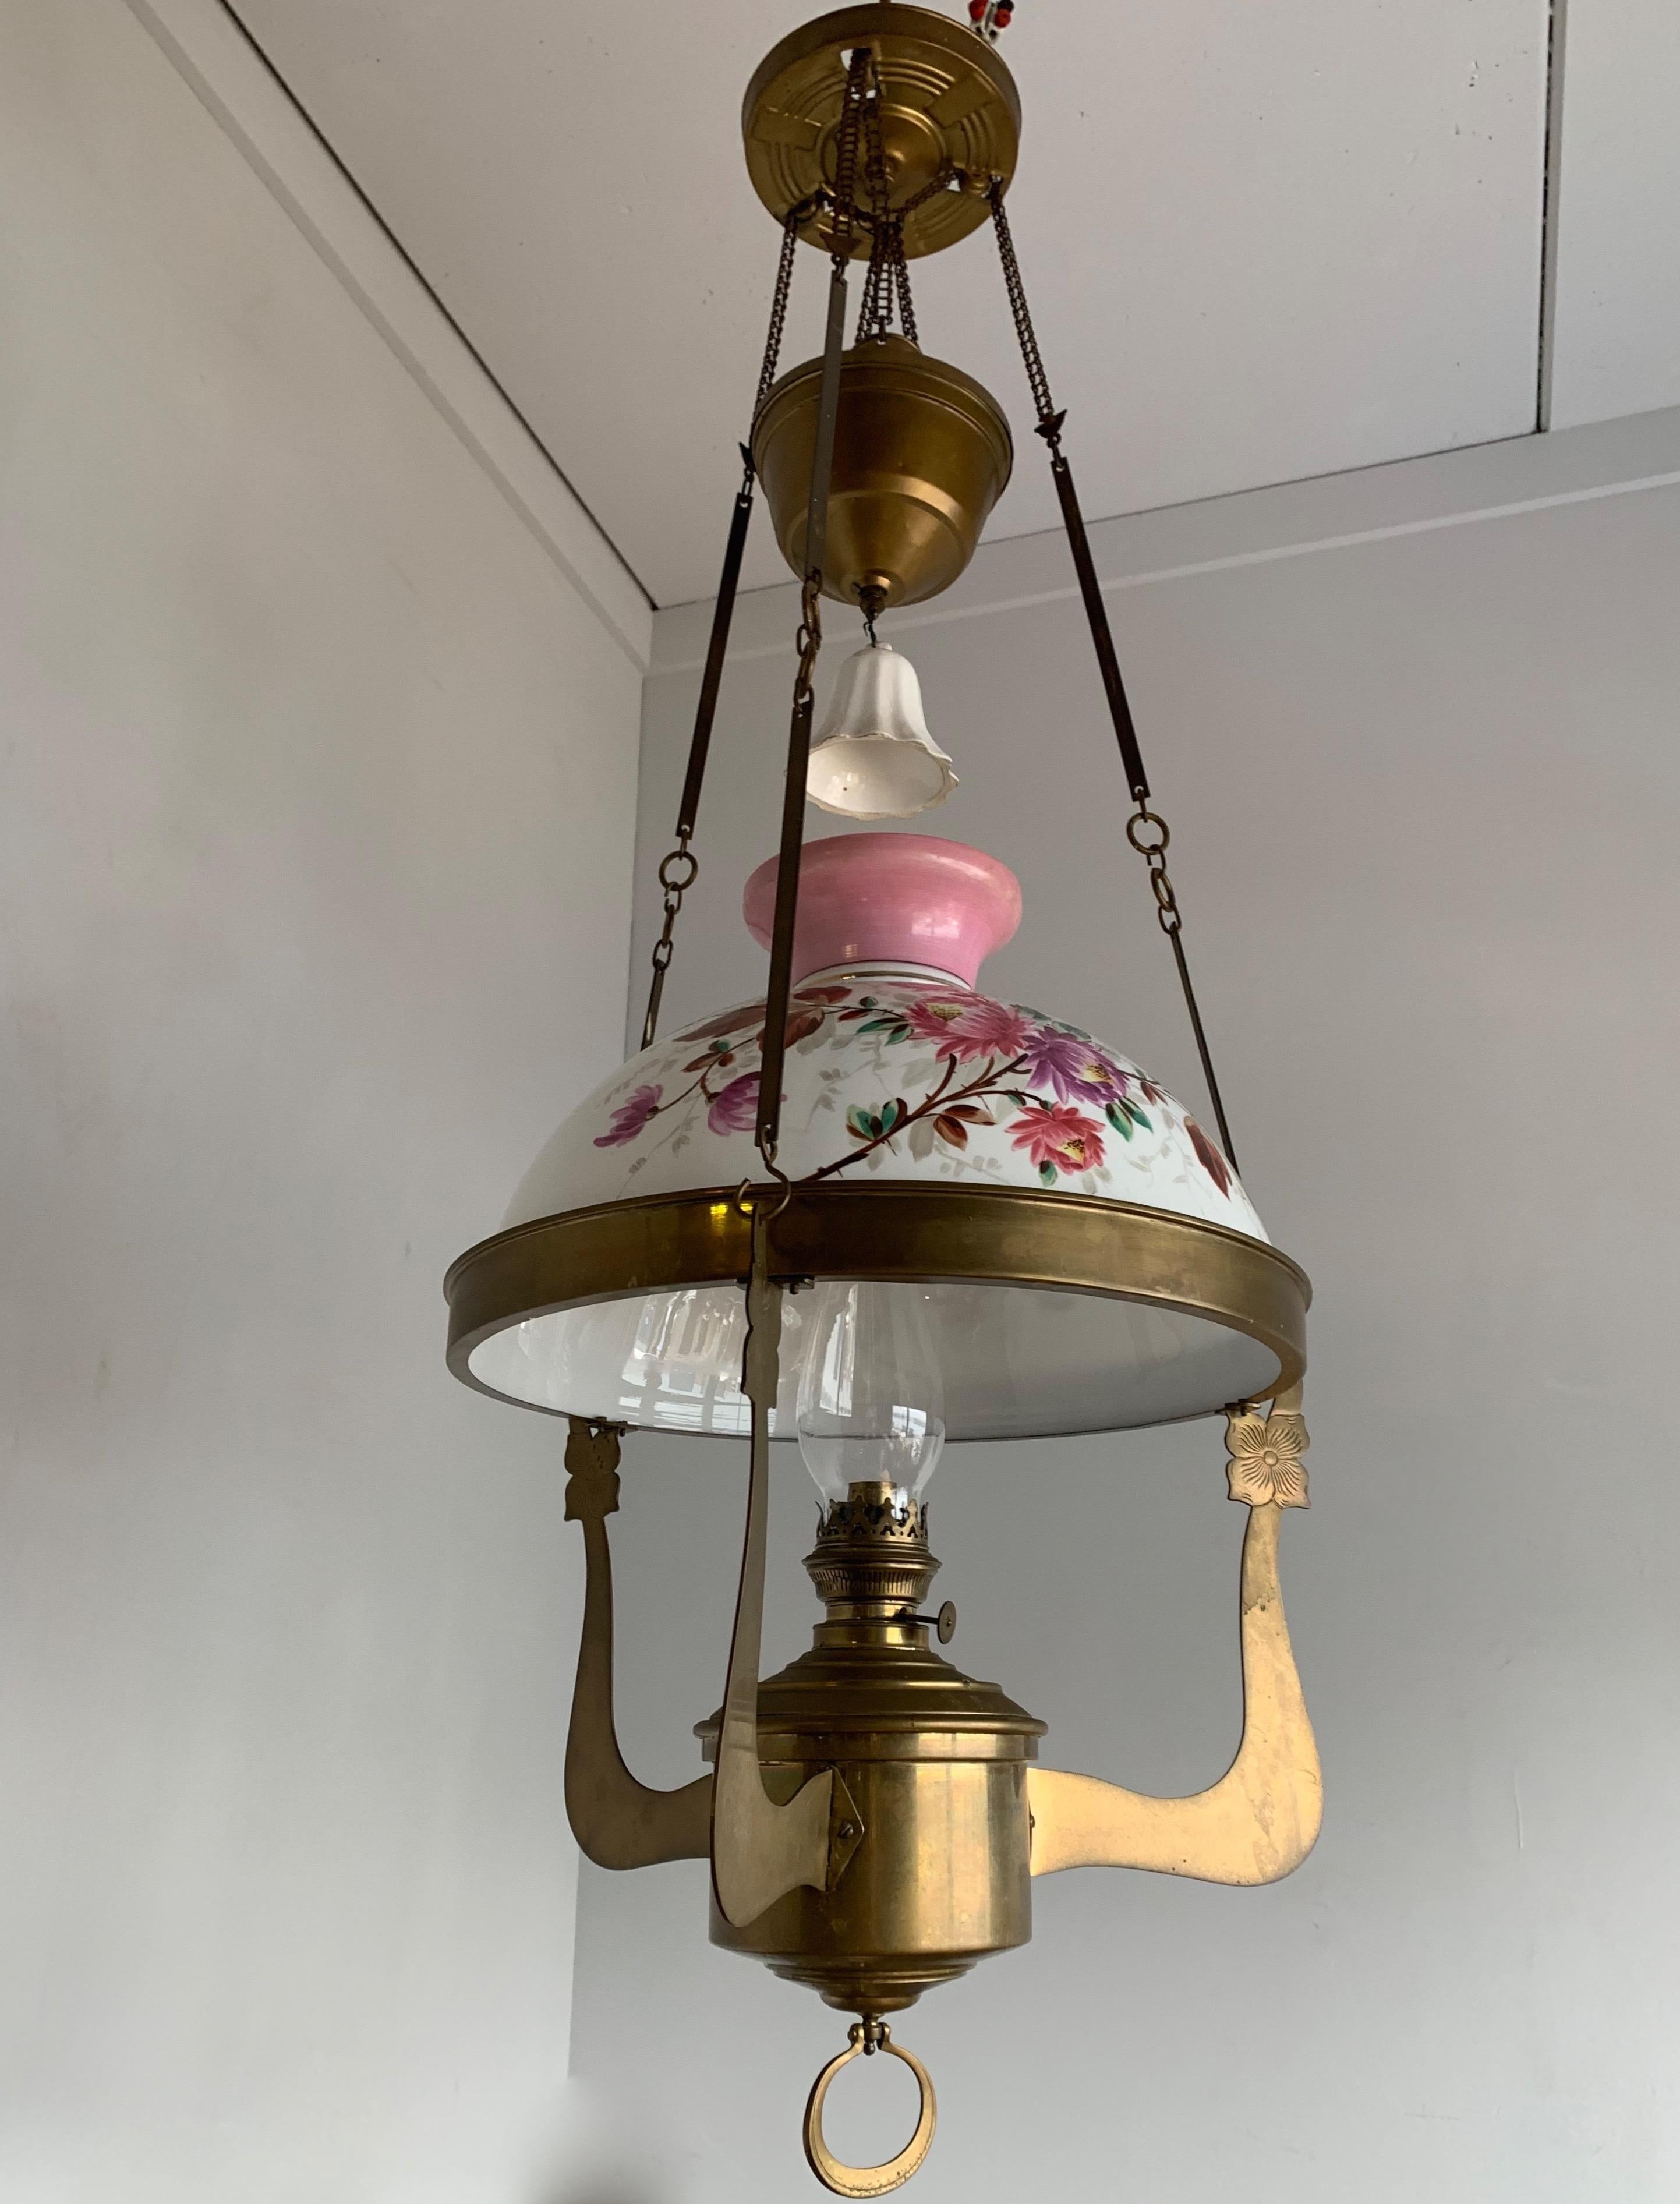 Antique, stunning and rare, hand painted oil lamp.

This large and impressive oil lamp dates from the early 1900s and the Arts & Crafts design is exceptional. It is made of top quality materials and with expensive techniques and that is one of the